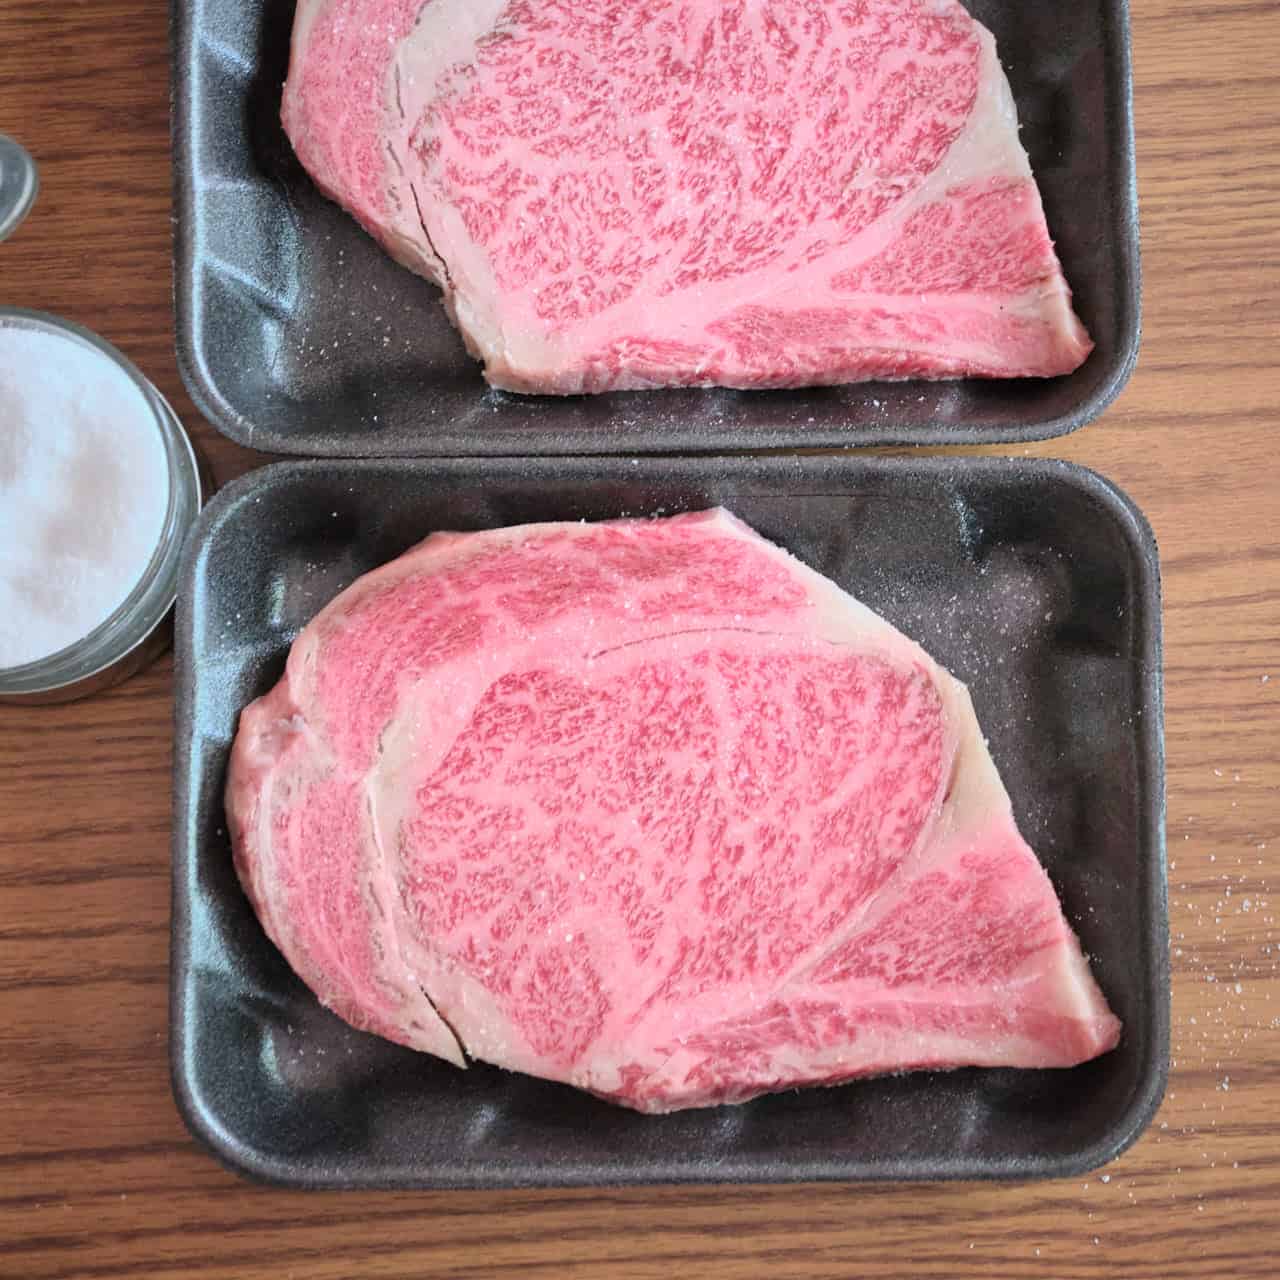 Salting the Wagyu steaks early